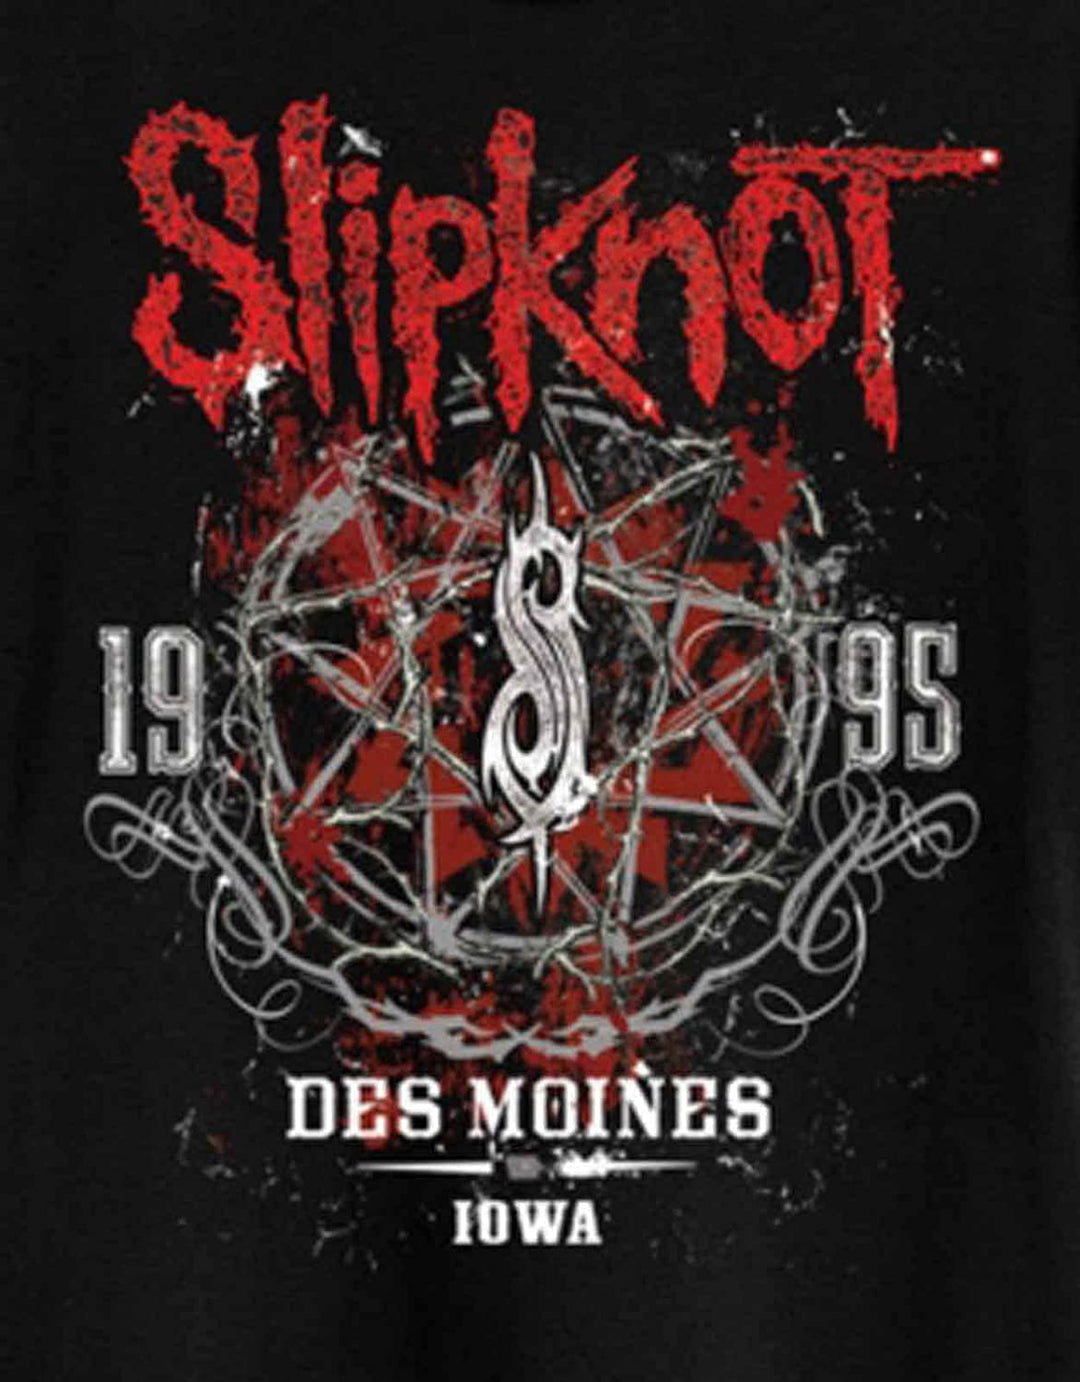 Amplified Slipknot 'Des Moines' (Black) T-Shirt Clothing (Small)